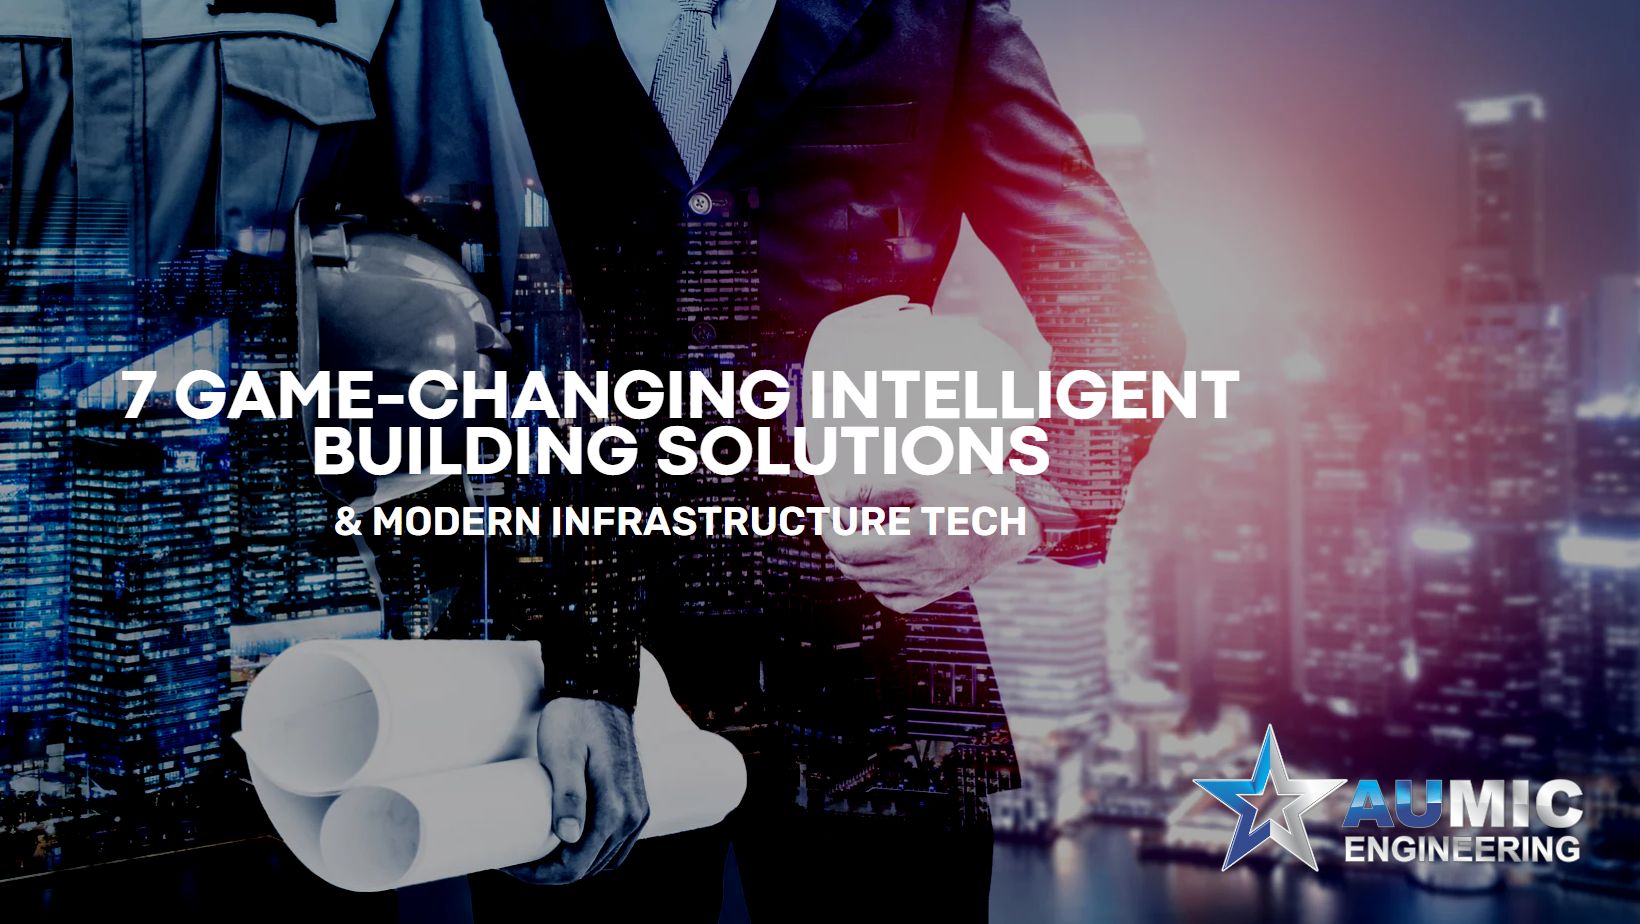 This an article that describes our 7 game-changing intelligent building solutions at Aumic Engineering